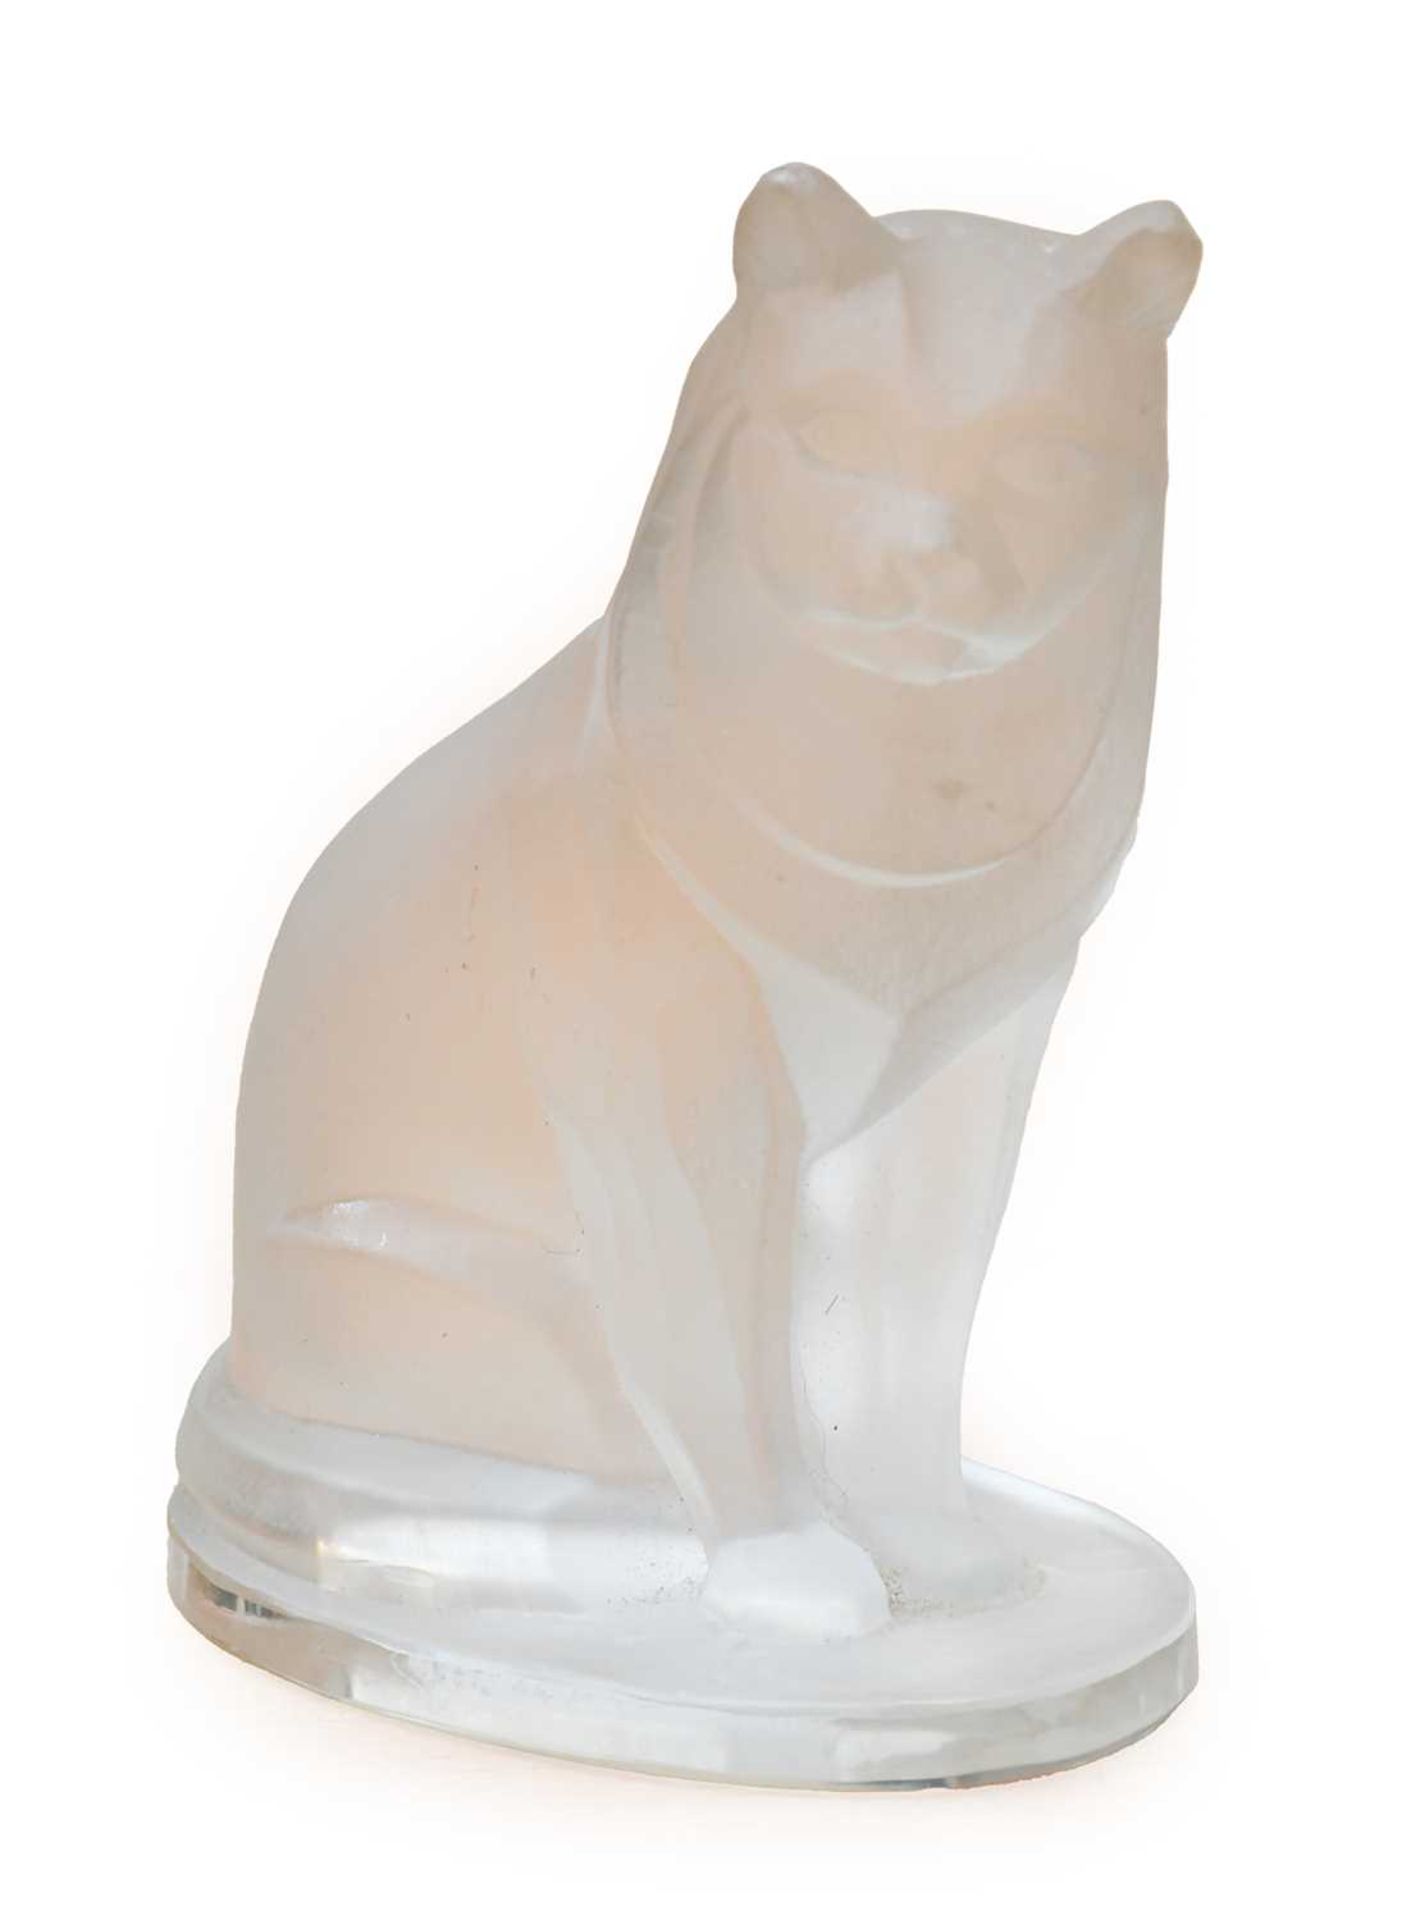 Herman George Ascher: A 1920’s Bohemian Frosted Glass Car Accessory Mascot, as a seated cat, 10cm